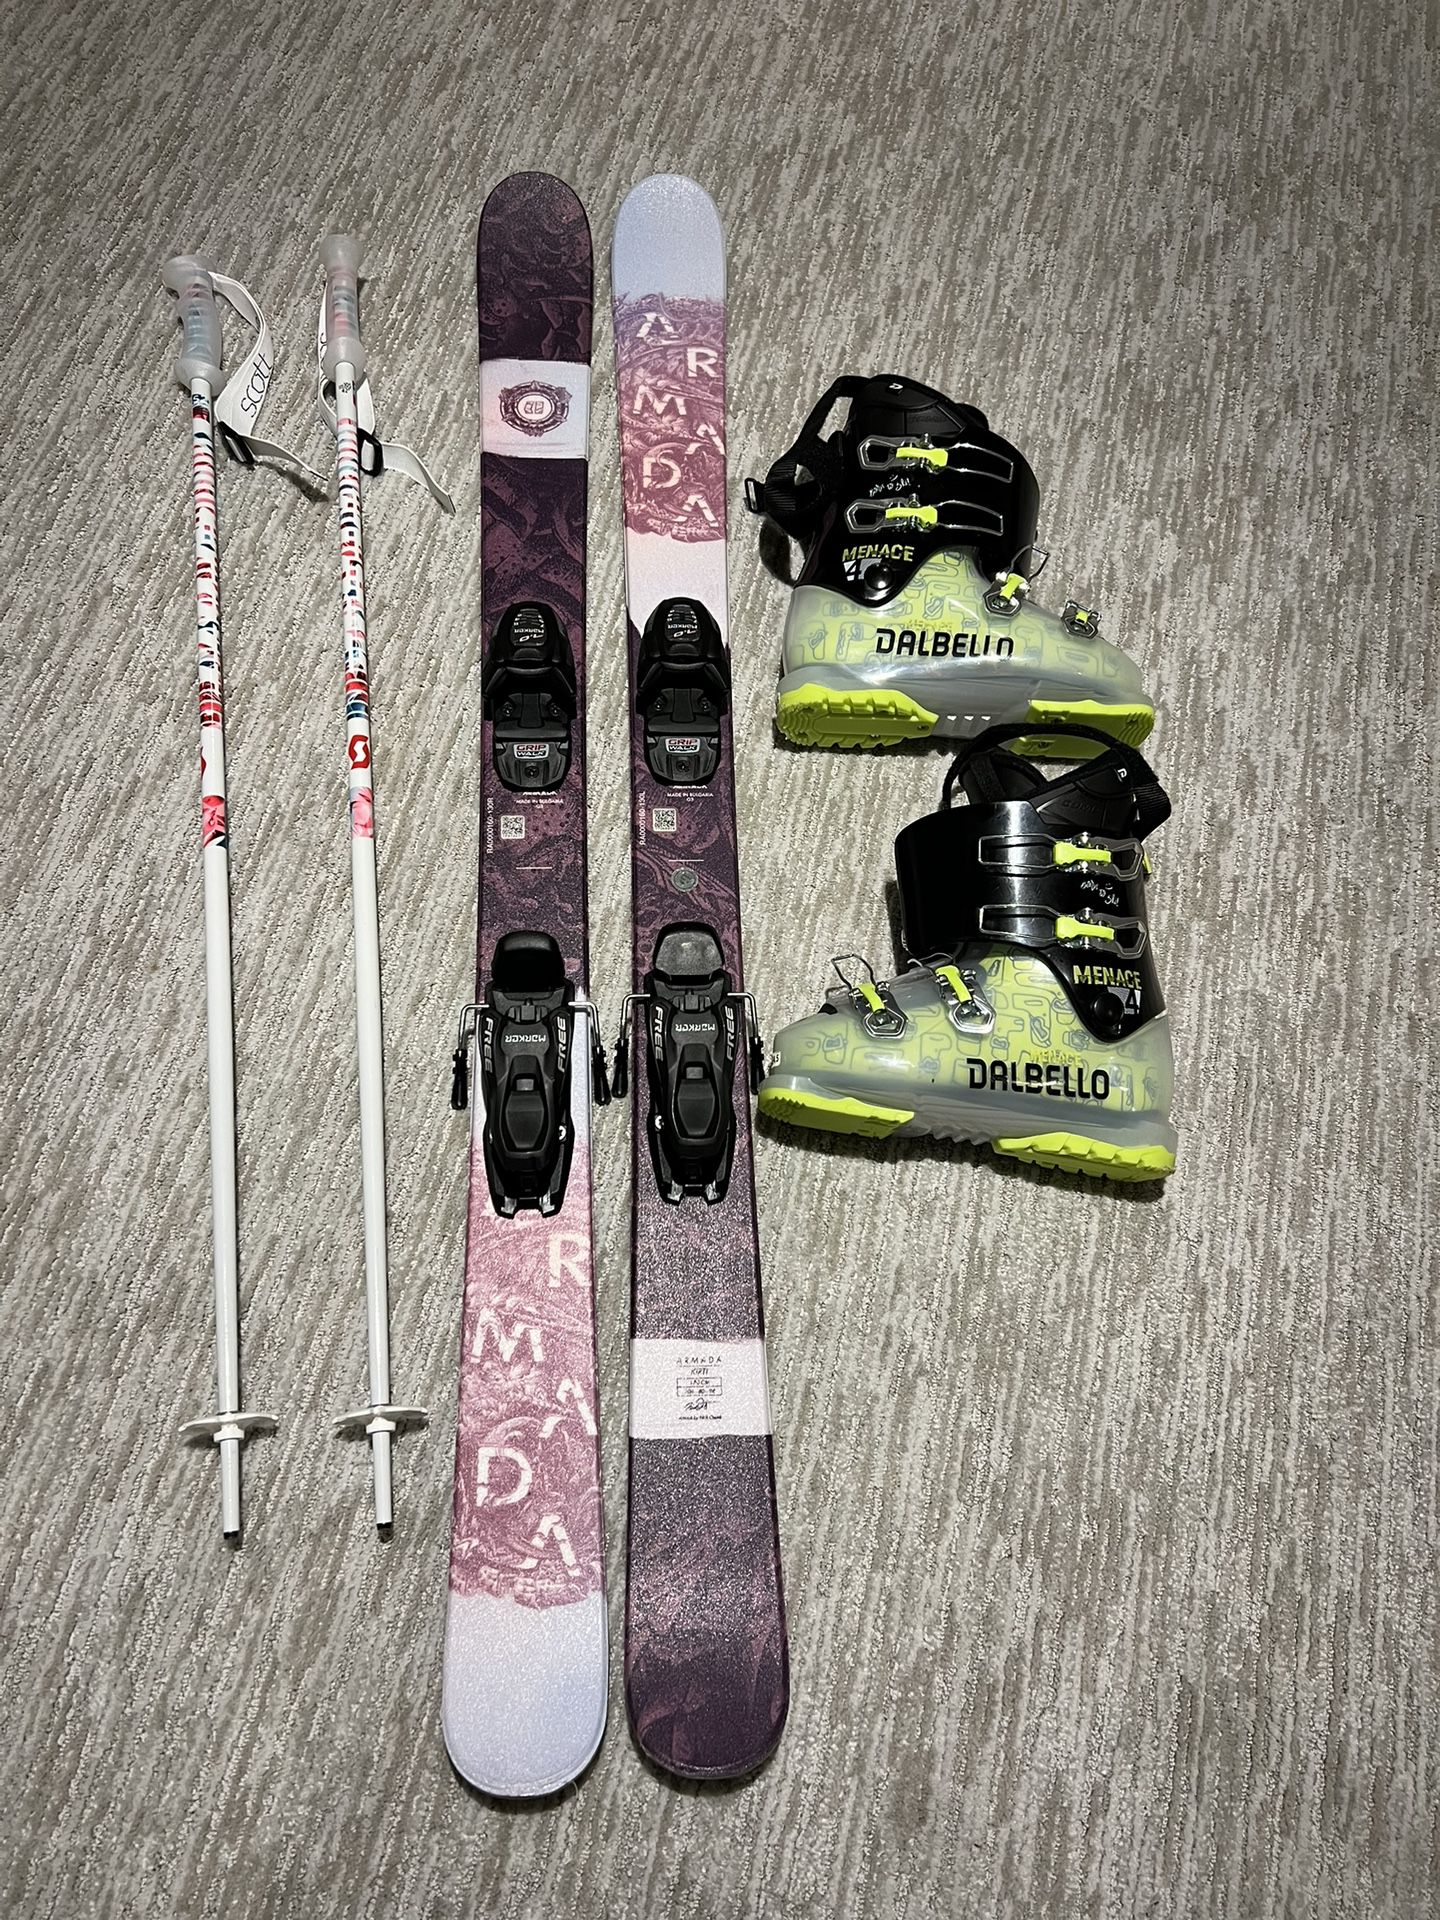 Brand New Ski Gear Used Once